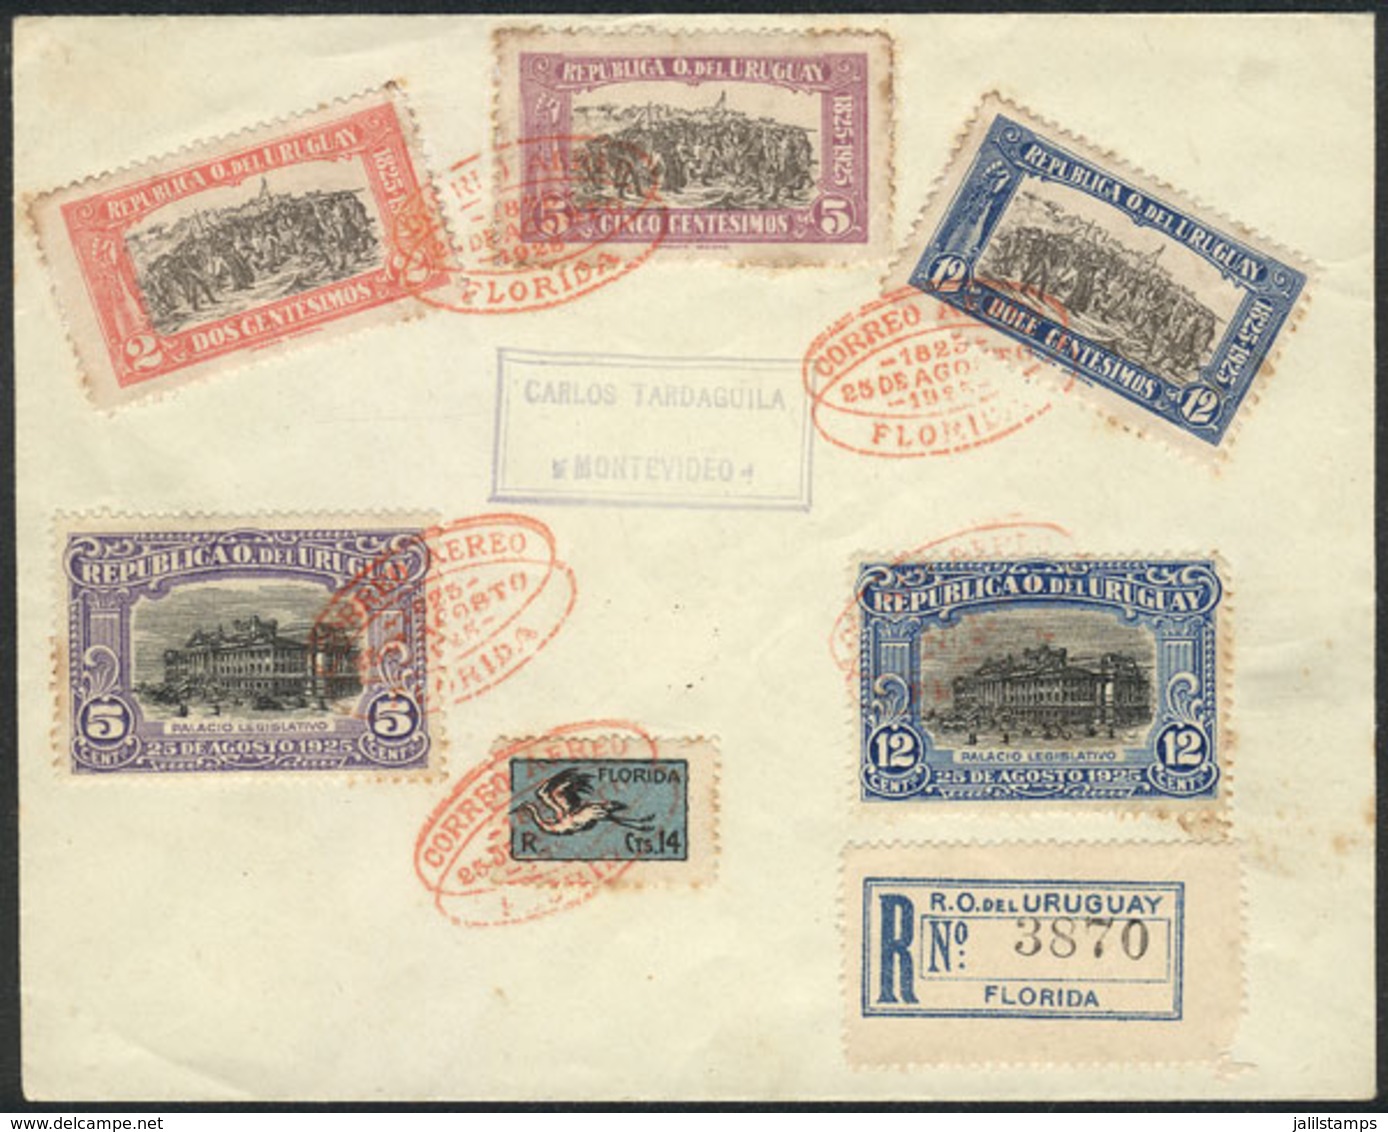 944 URUGUAY: 25/AU/1925 First Flight Florida-Montevideo: Registered Cover With Nice Multicolored Postage And Arrival Bac - Uruguay